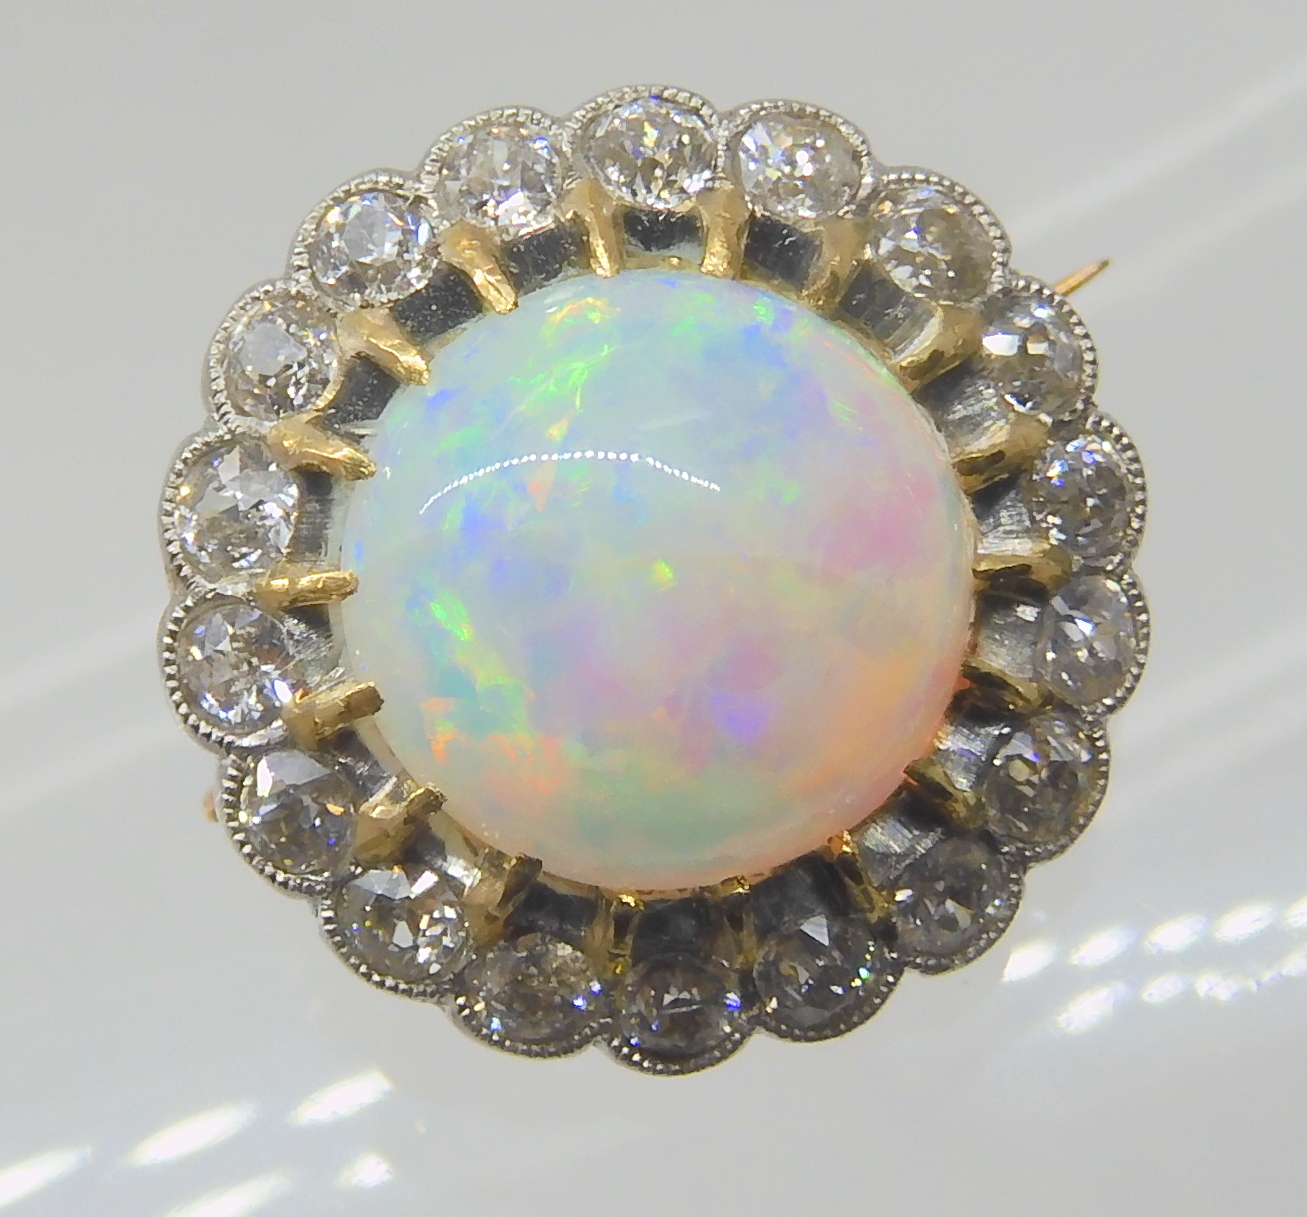 AN OPAL AND DIAMOND BROOCH opal approx 10.4mm in diameter, surrounded with a row of diamonds which - Image 5 of 6